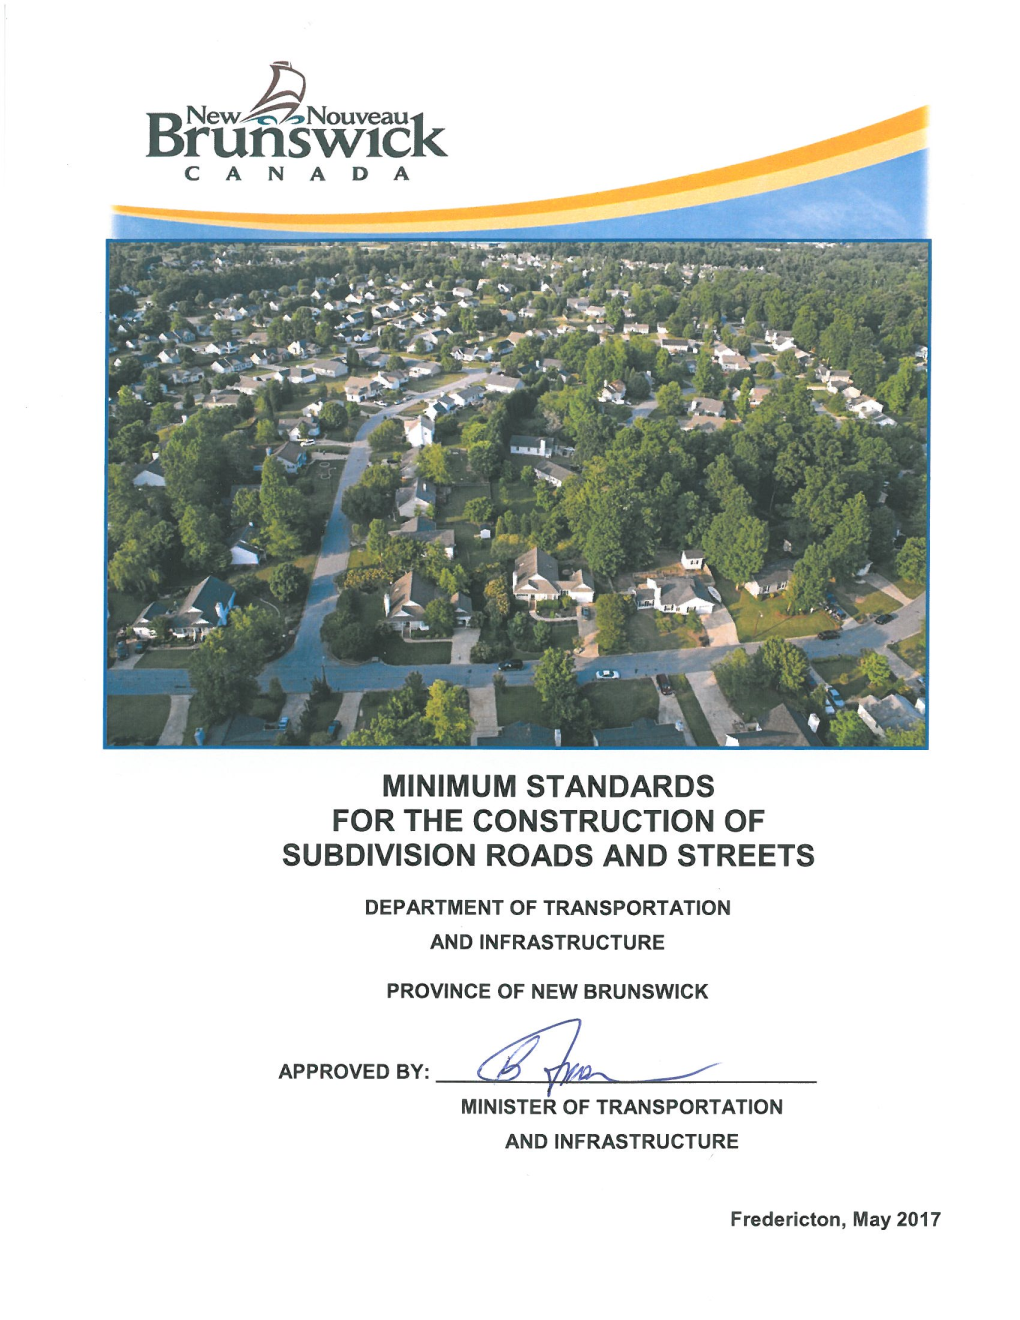 Minimum Standards for the Construction of Subdivision Roads and Streets (May 2017)